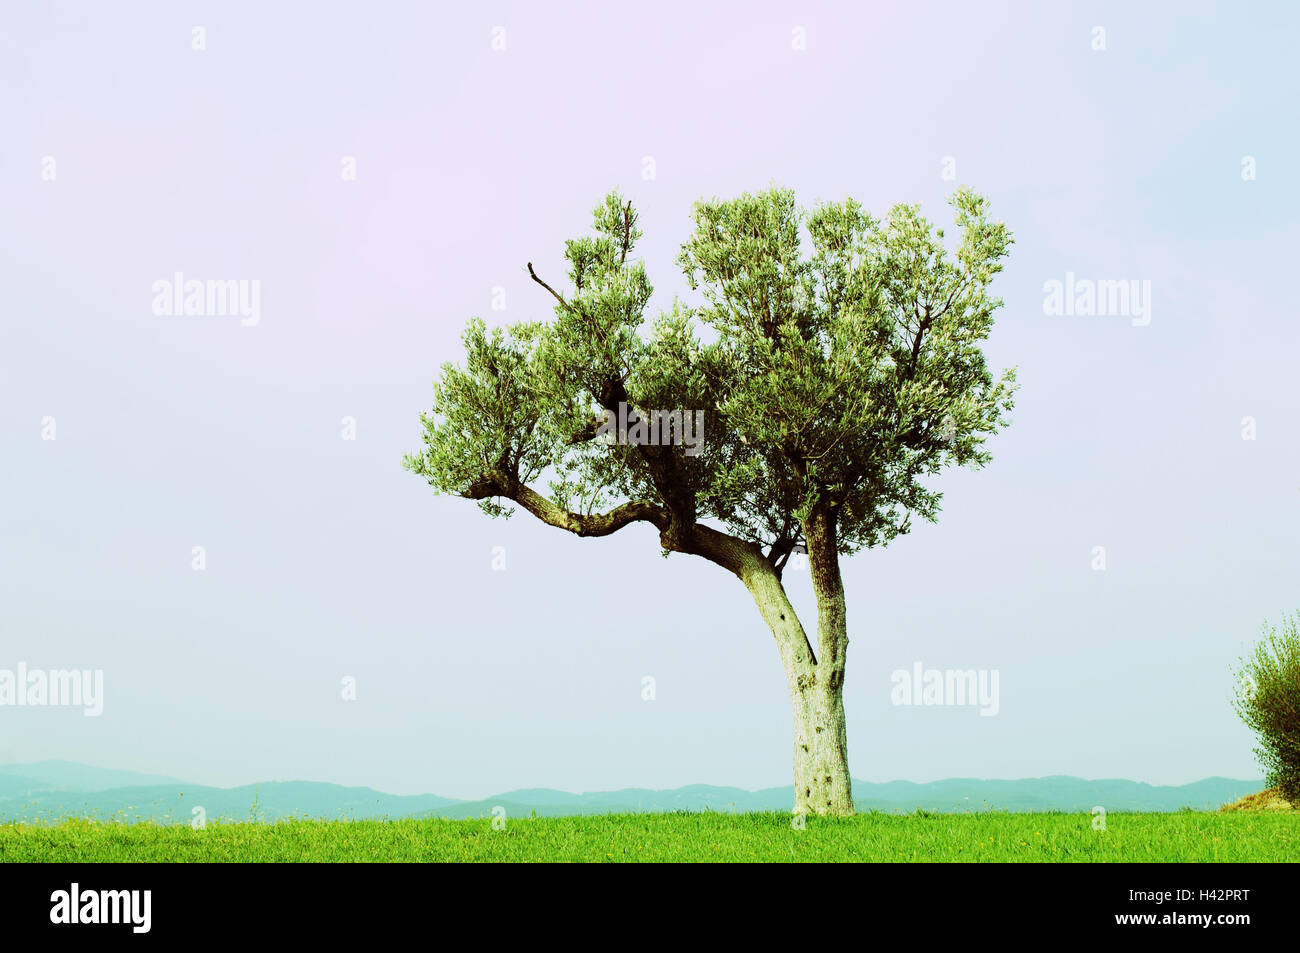 Italy, Tuscany, Maremma, meadow, olive tree, summer, scenery, tree, solitaire tree, olive tree, tree, olives, unmarked, individually, nature, agriculture, climate, heat, Mediterranean, Stock Photo